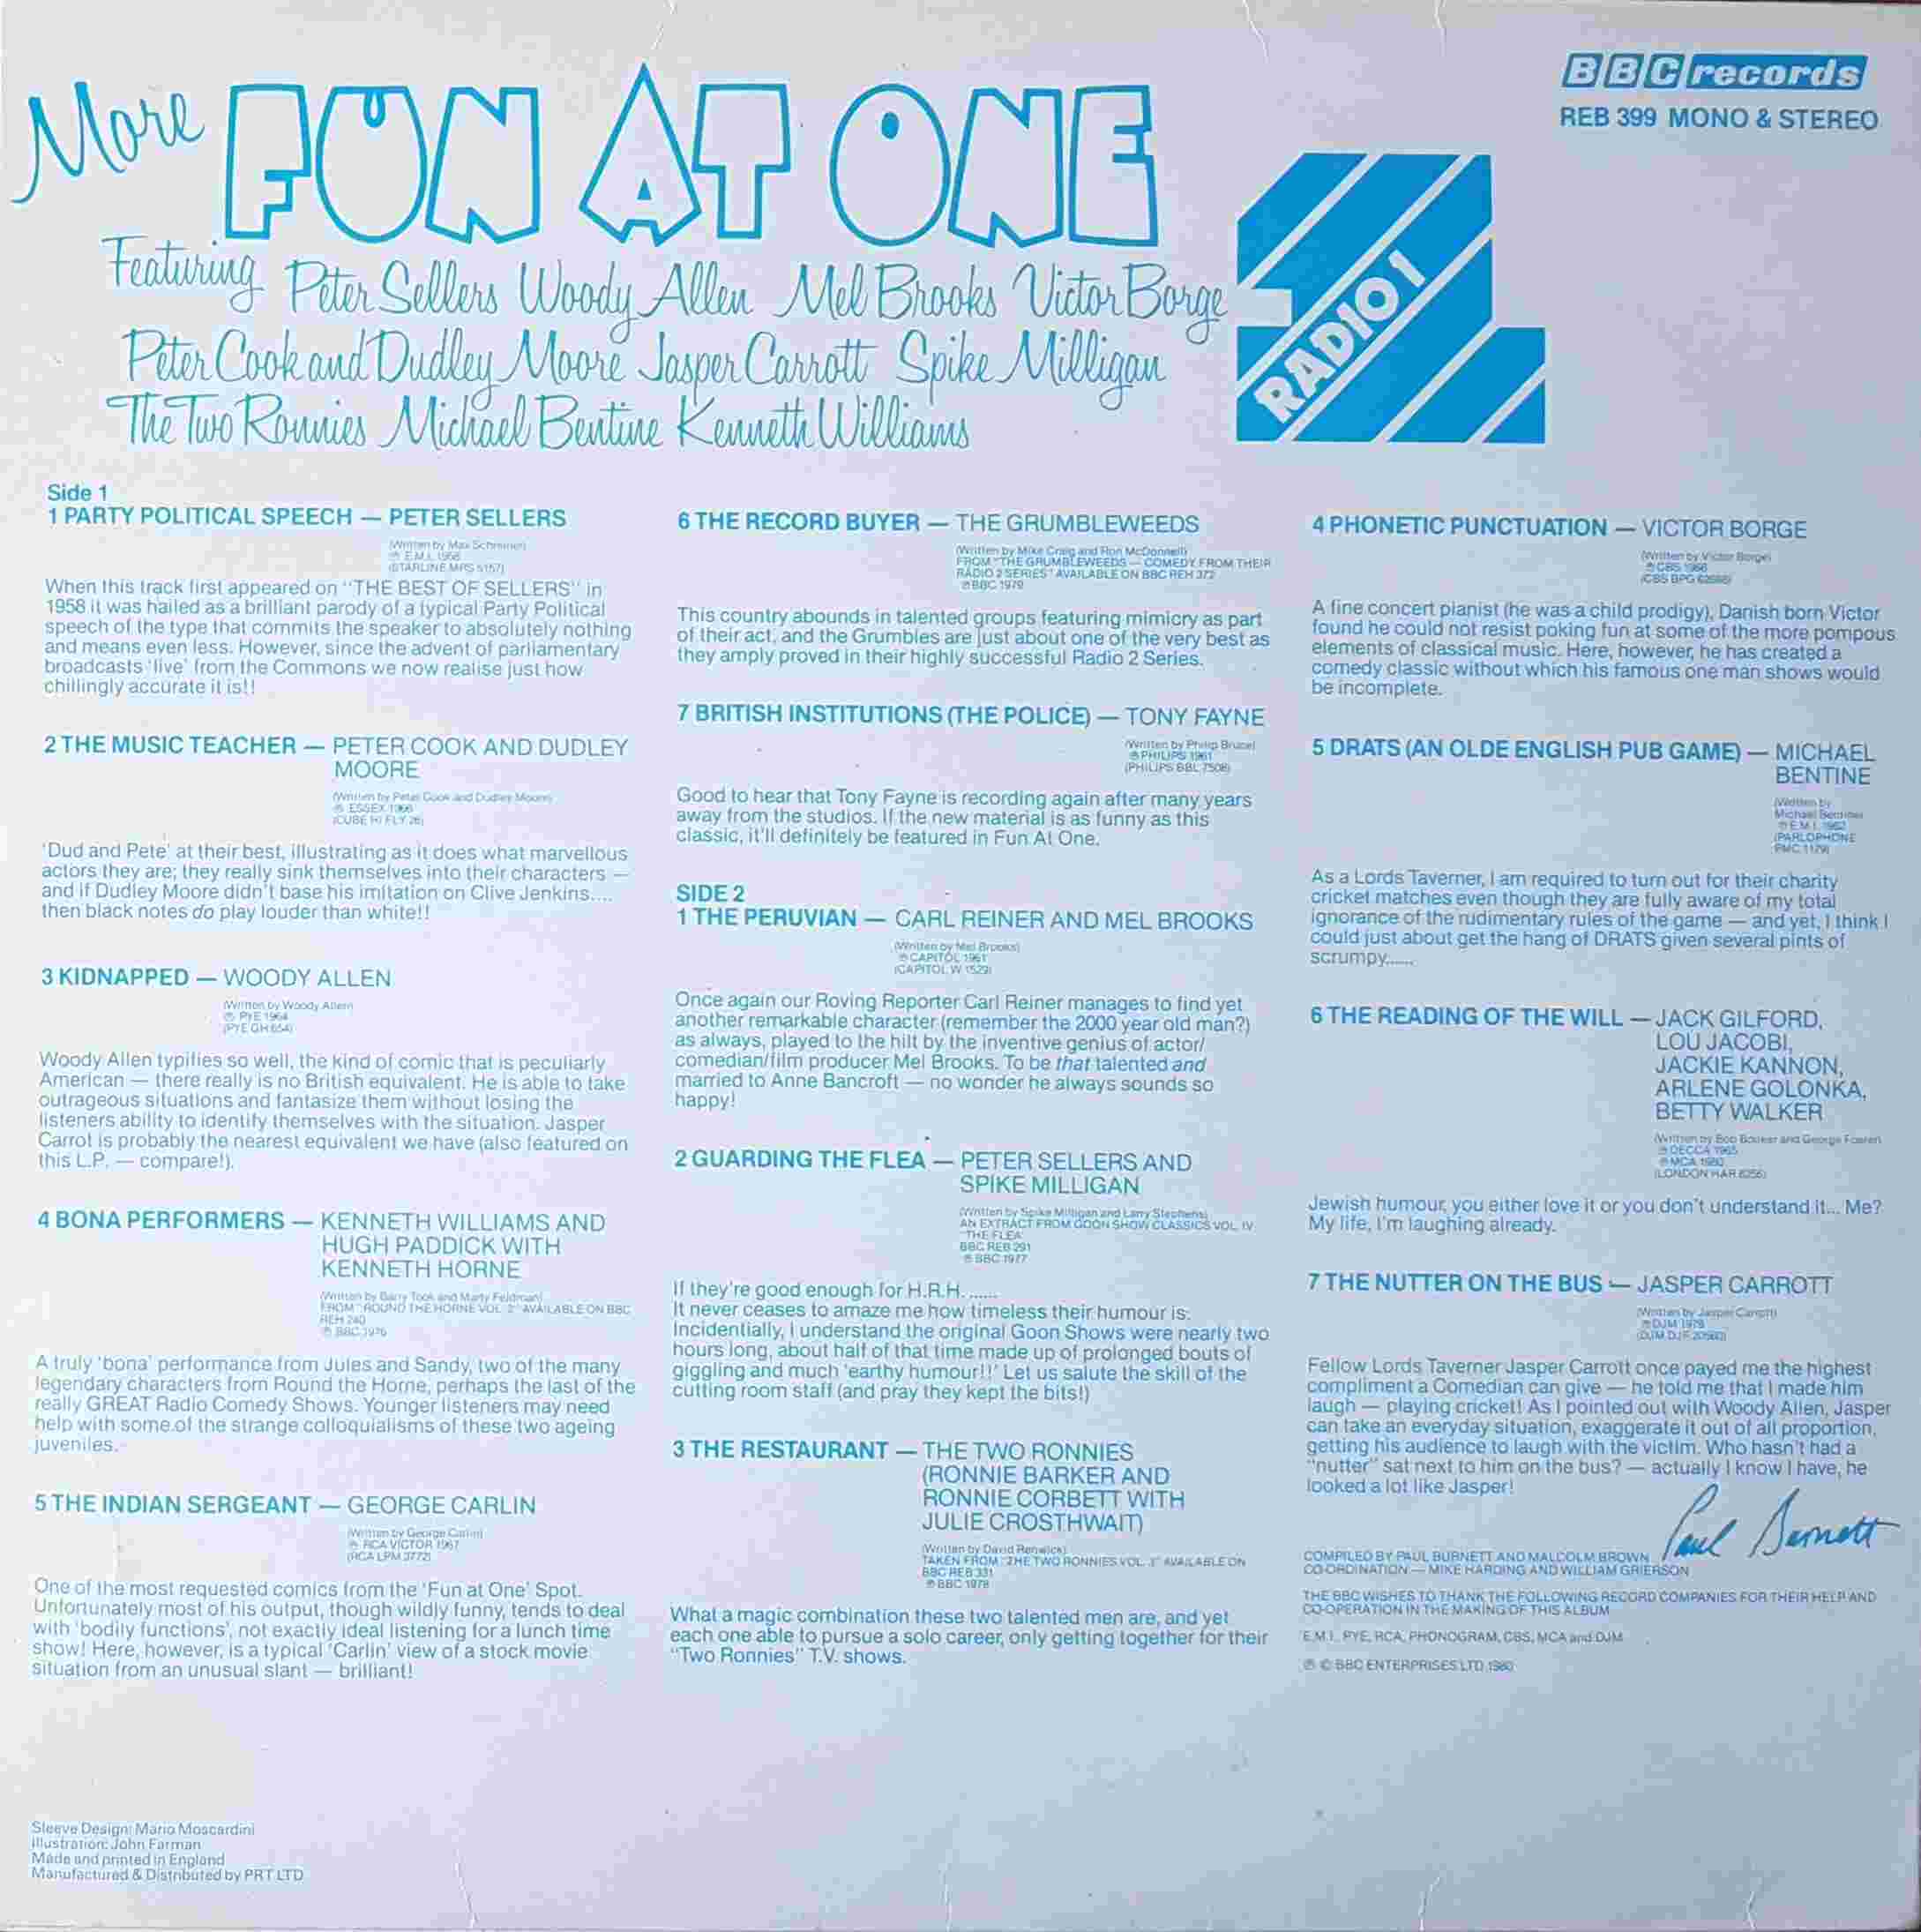 Back cover of REB 399